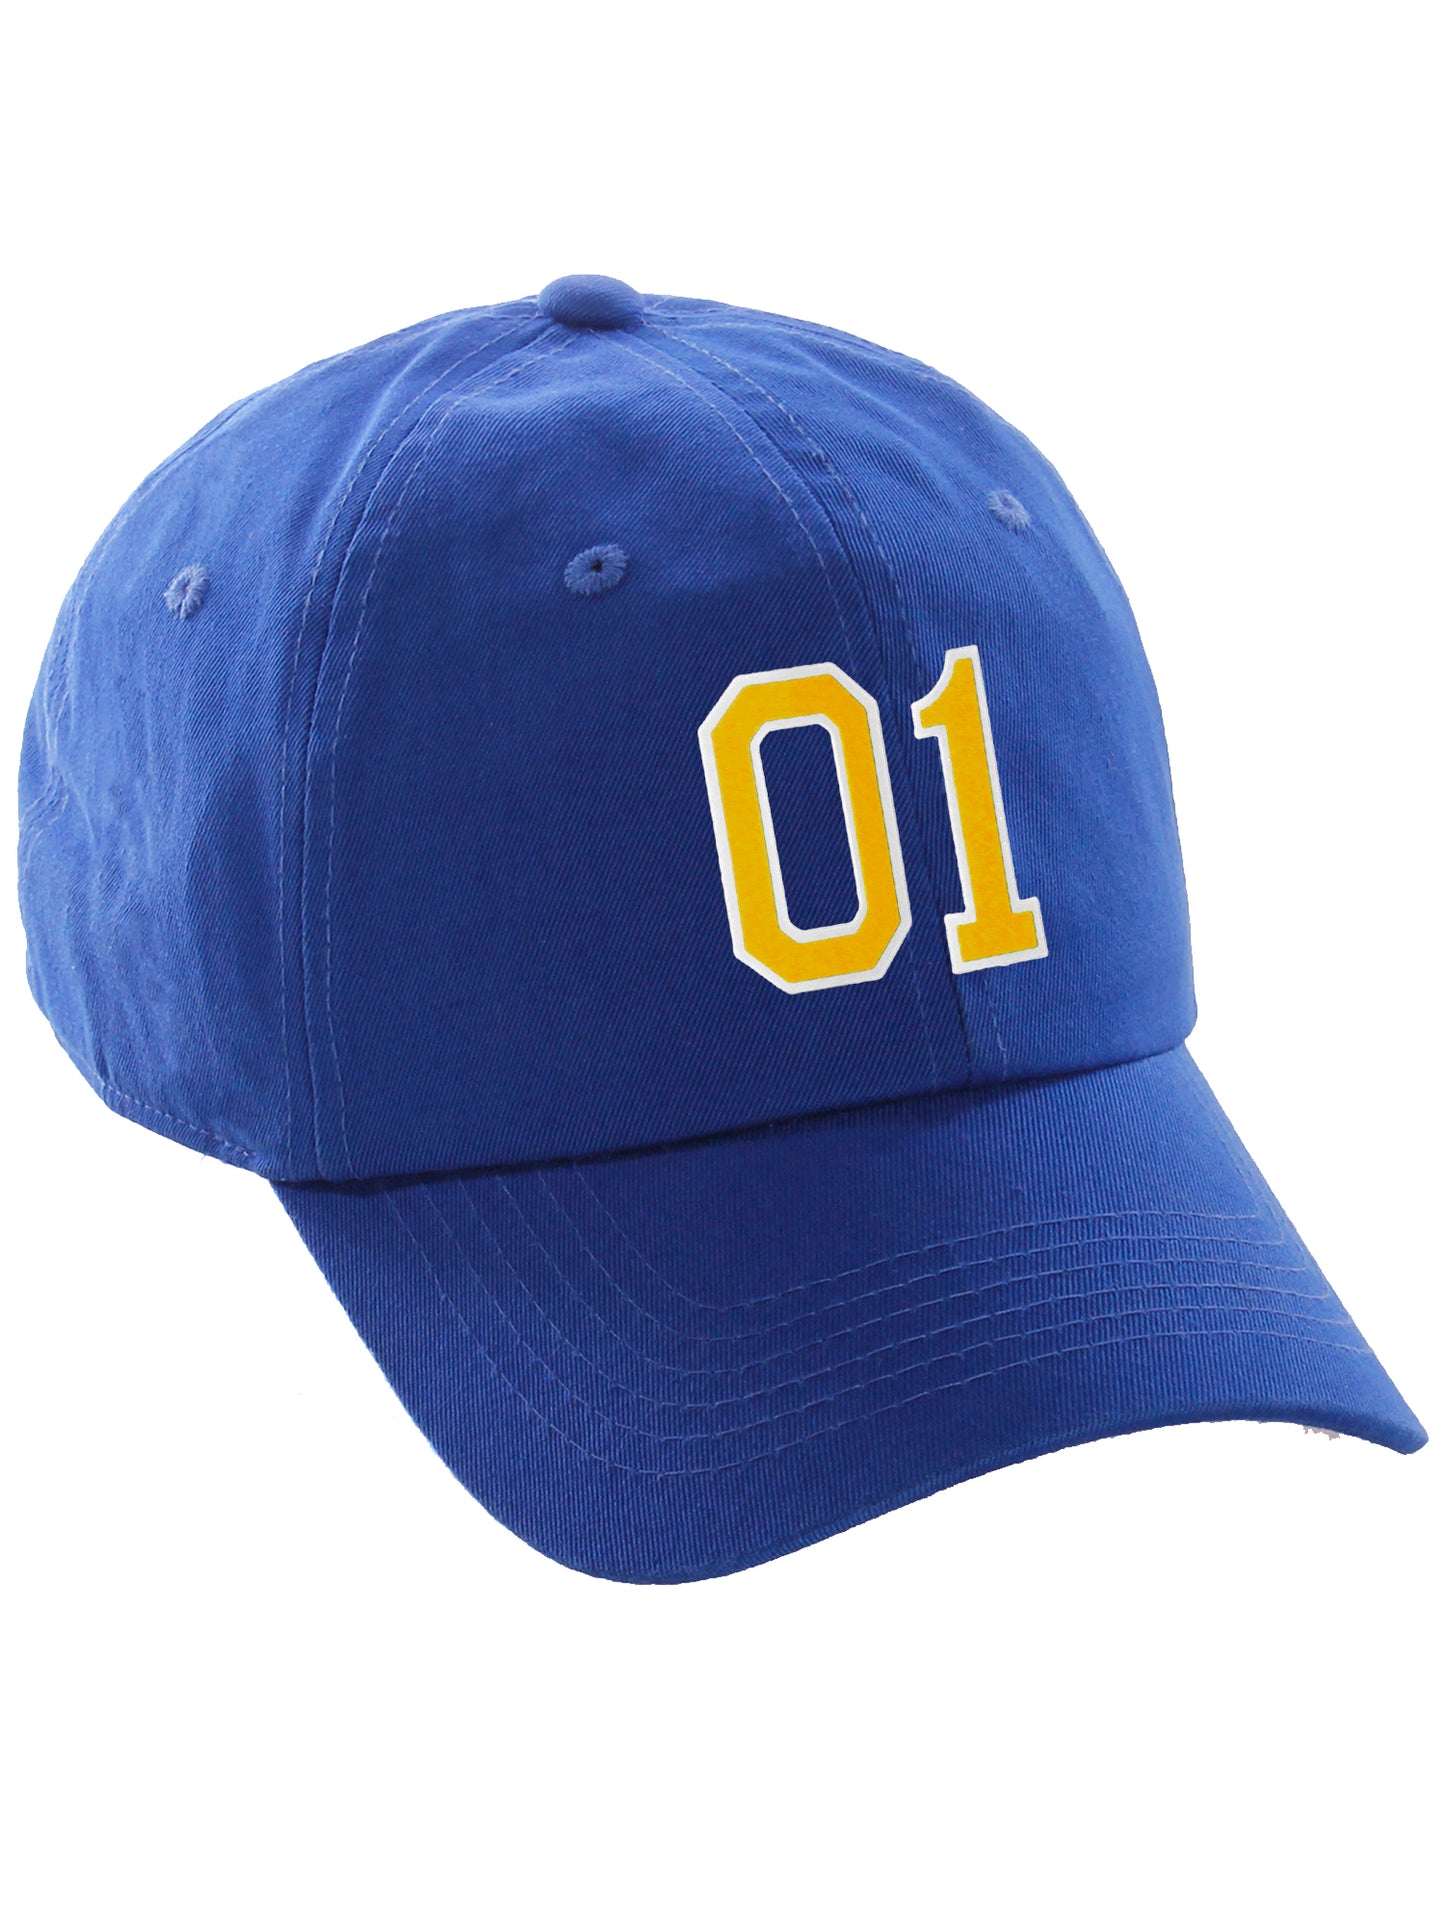 I&W Hatgear Customized Number Hat 00 to 99 Team Colors Baseball Cap, Blue hat White Gold